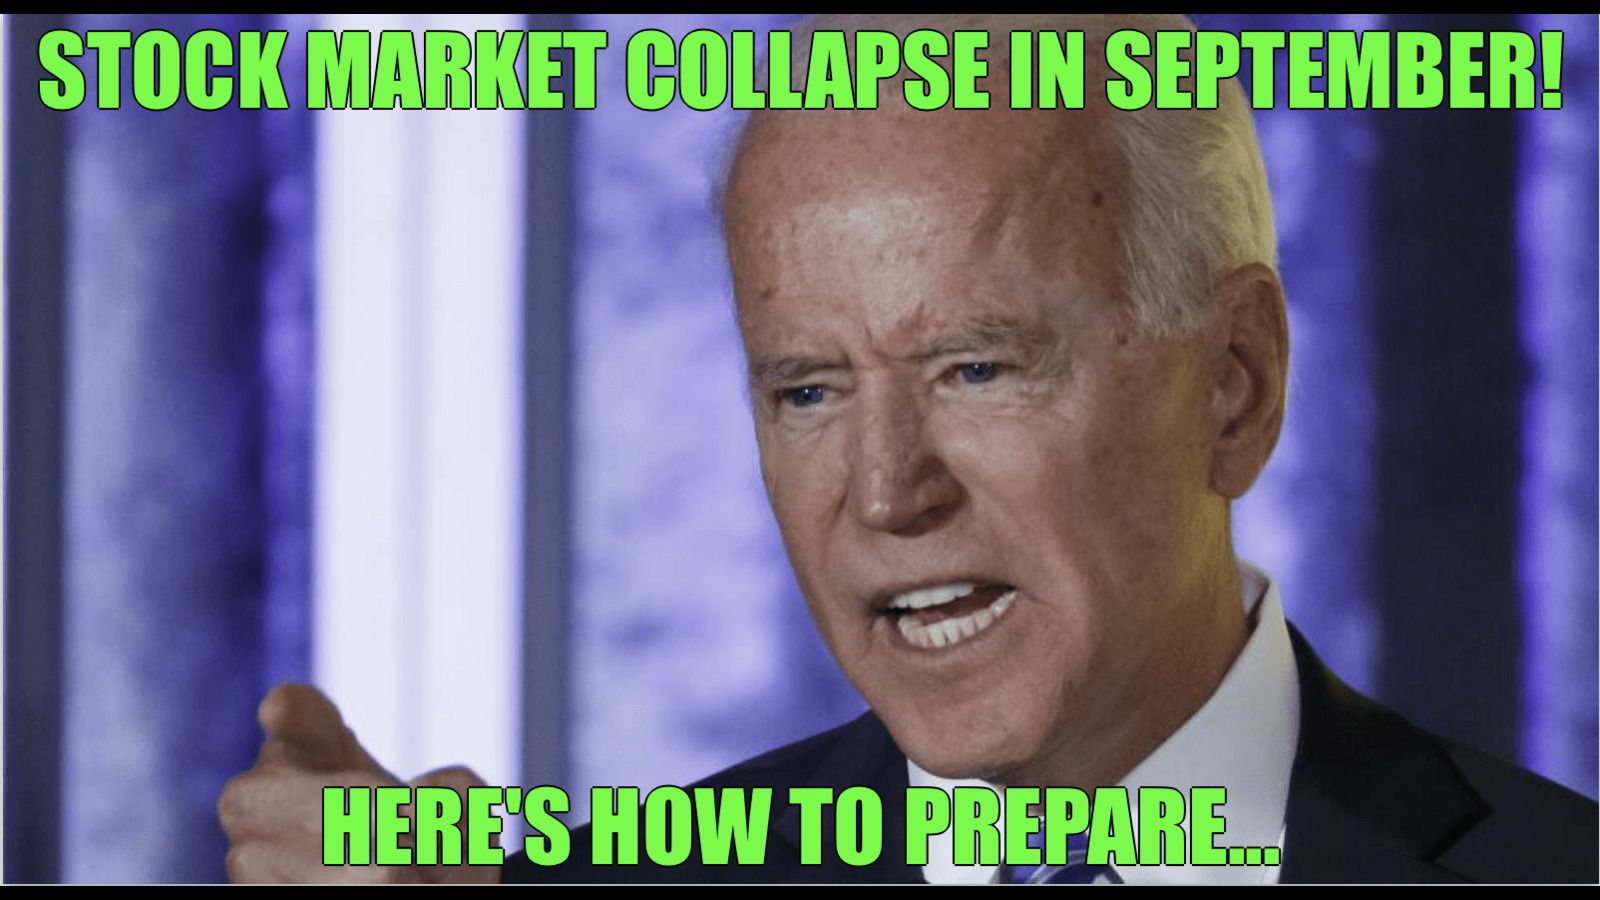 Stock Market "COLLAPSE" Is Coming, Here's How To Prepare...